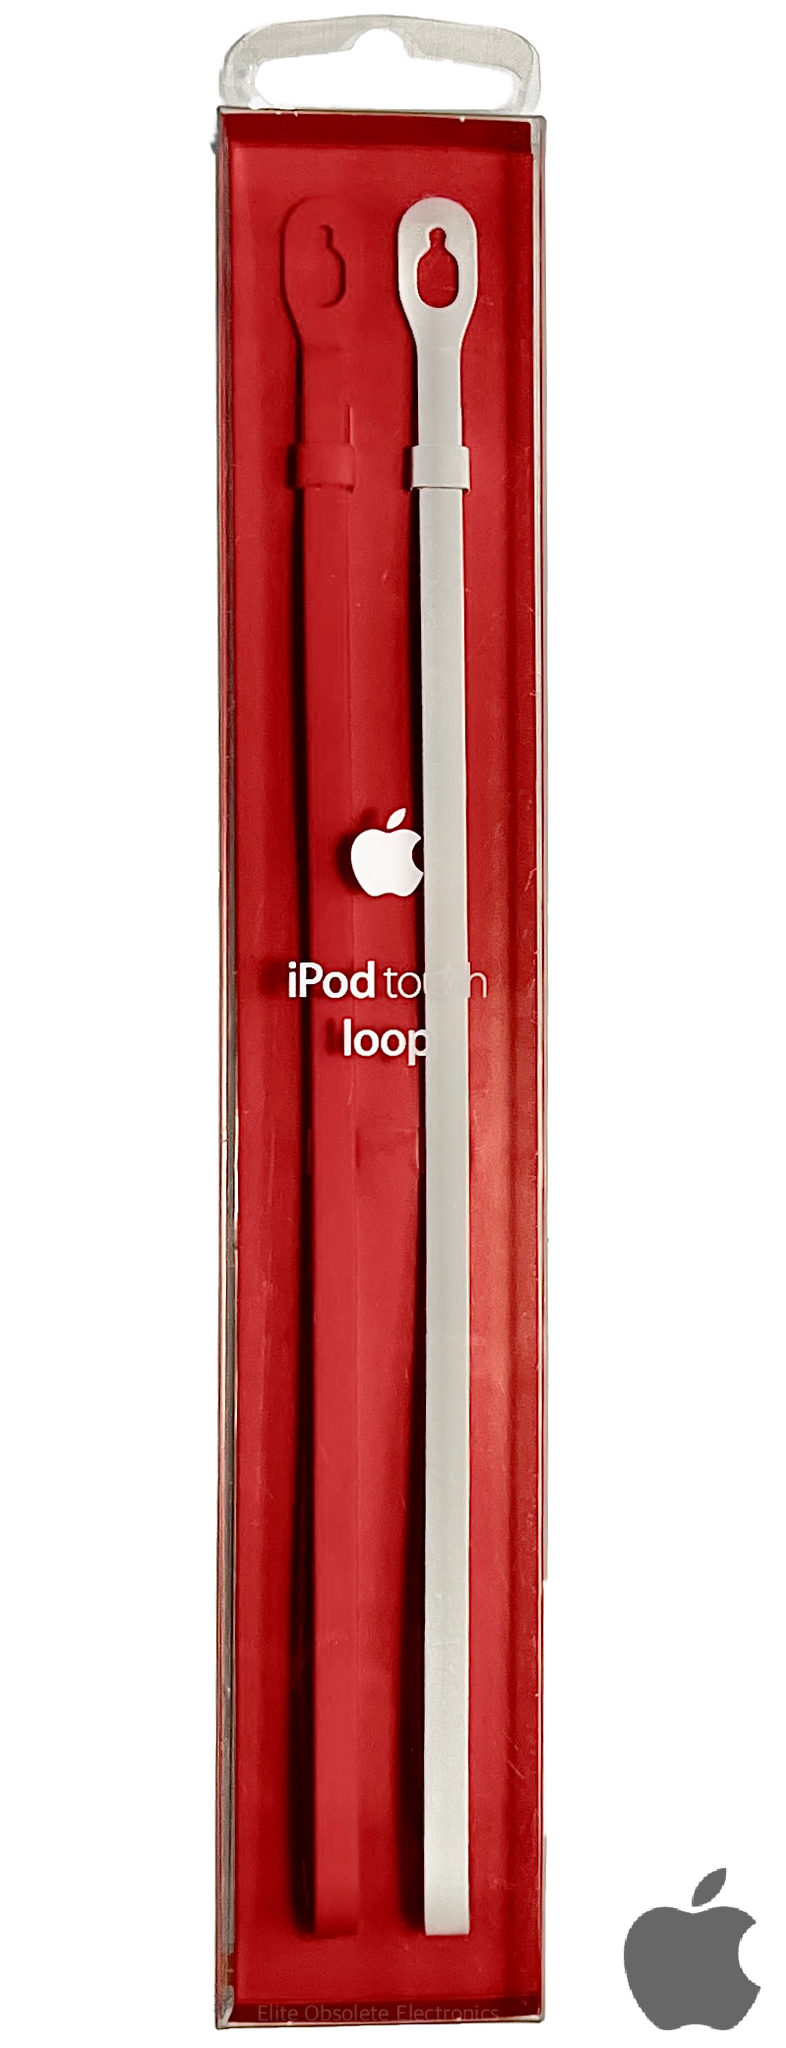 New Sealed Apple iPod Touch 5th Generation Loop White & Red MD829LL/A